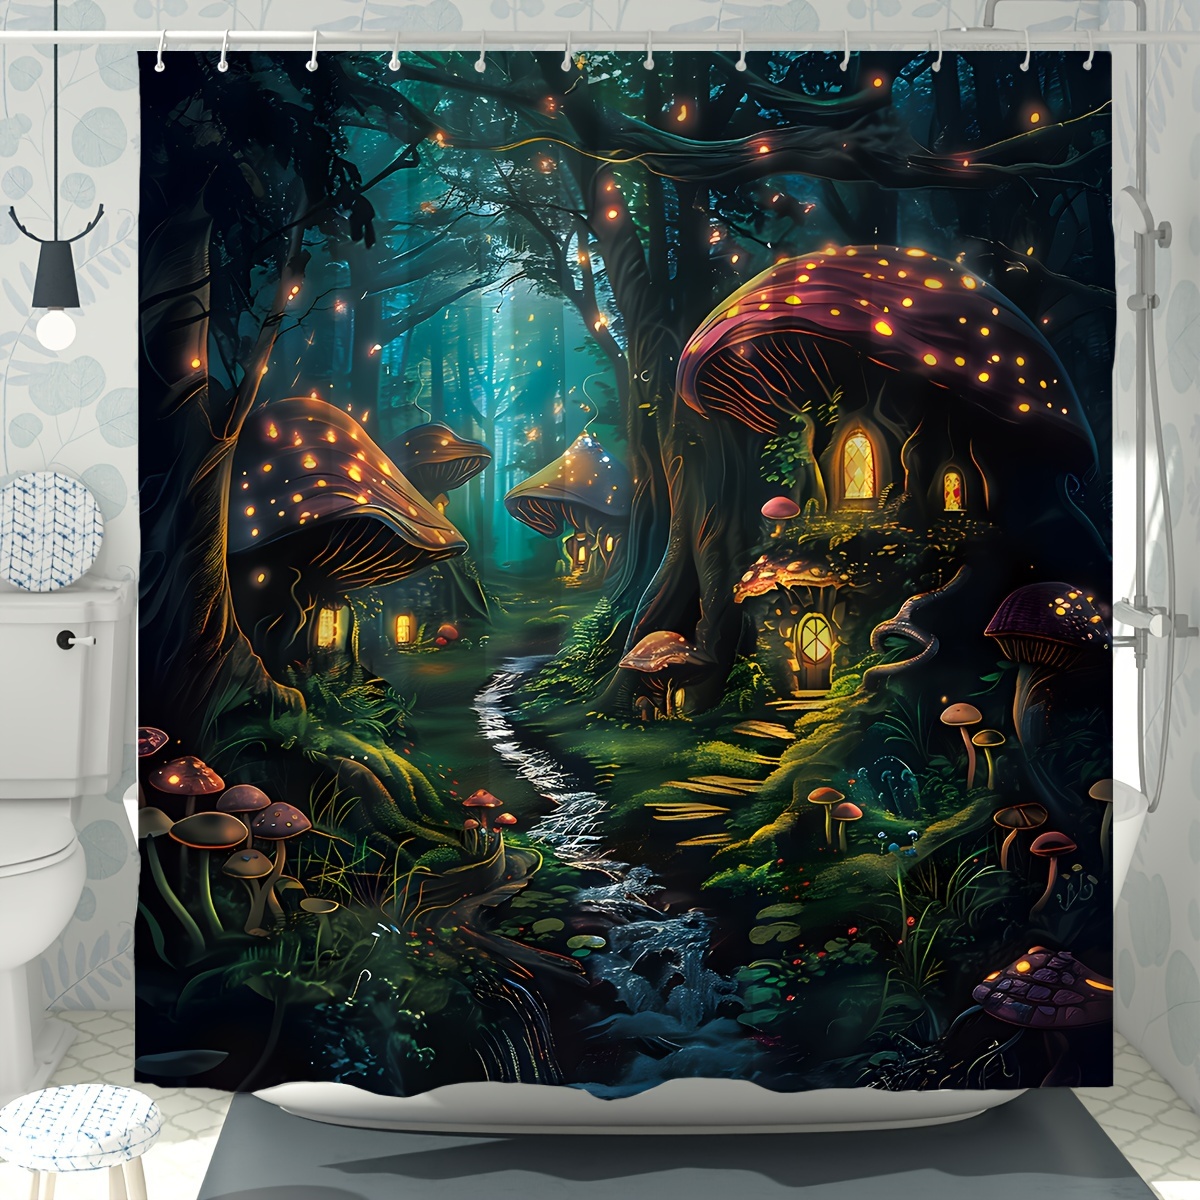 

Forest Shower Curtain - Waterproof Polyester, Machine Washable With 12 Hooks Included, Mushroom & Fairytale Design, Perfect For Bathroom Decor, 71x71 Inches